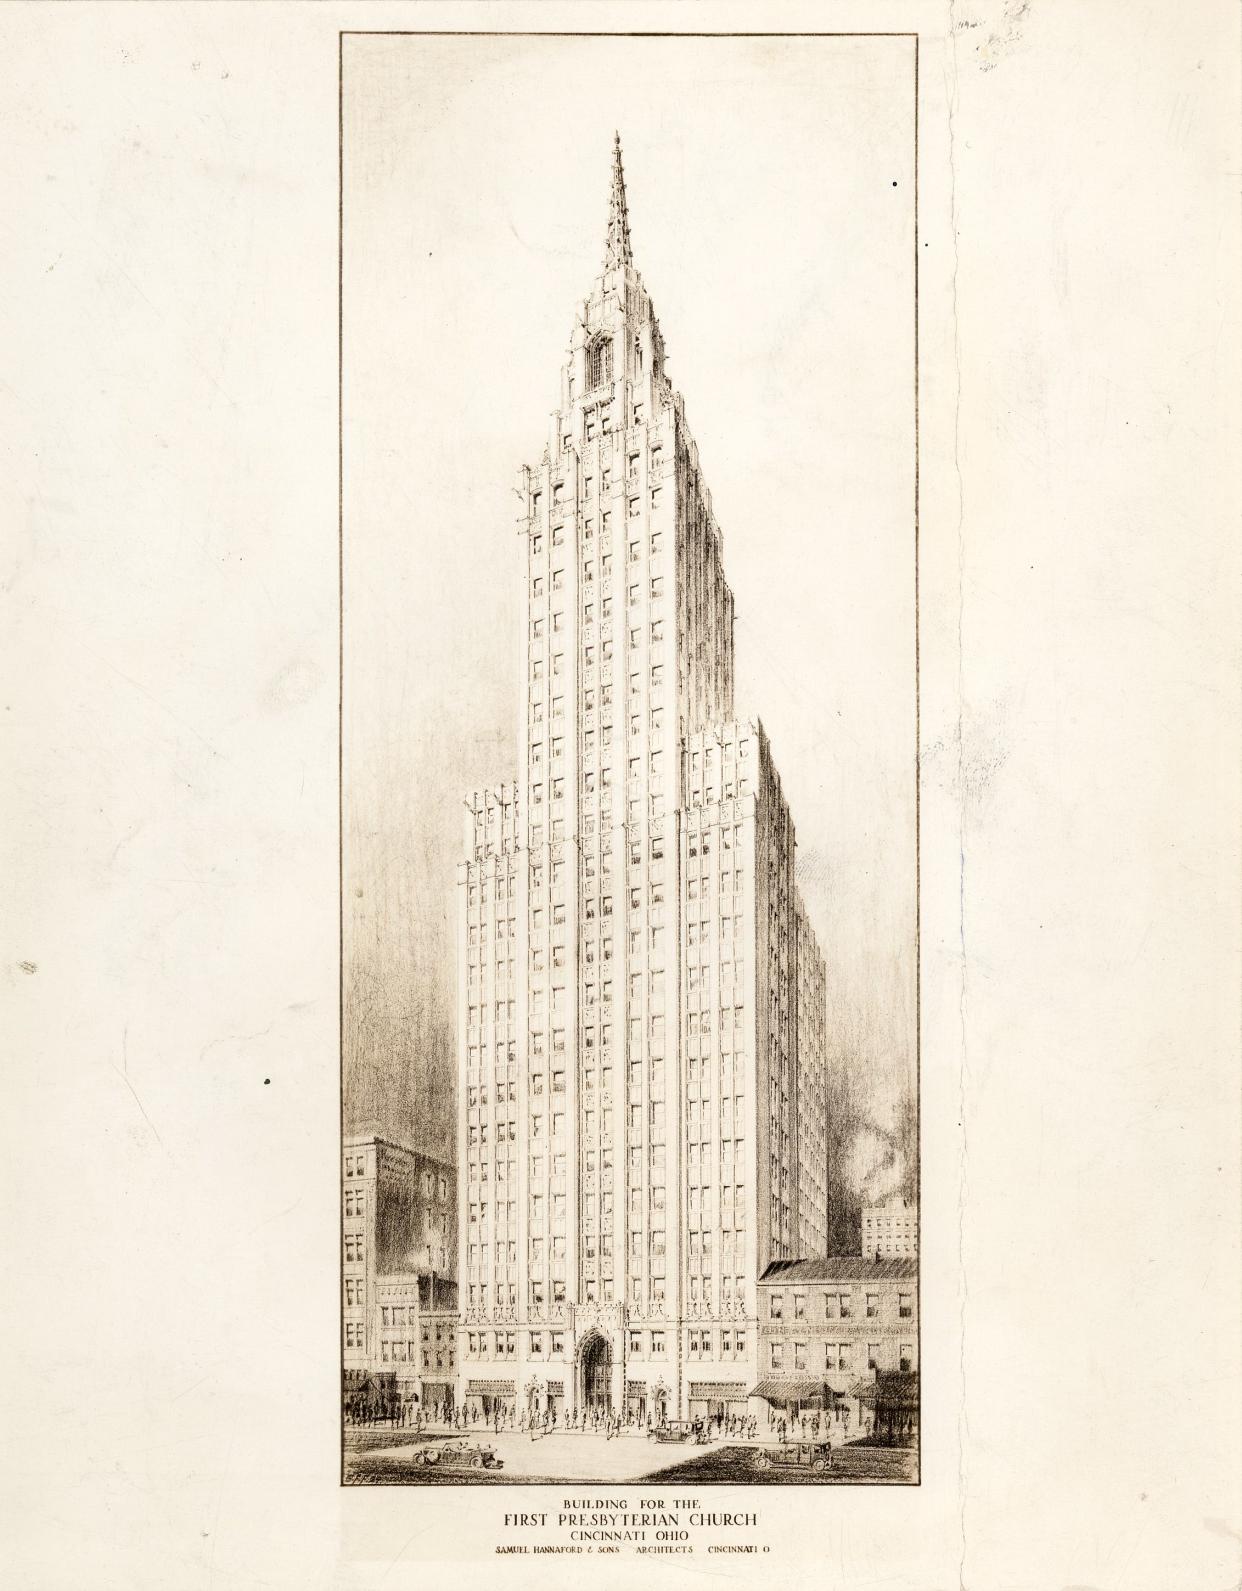 A sketch of Temple Tower, a proposed skyscraper to replace the First Presbyterian Church on Fourth Street. The design was by the firm Samuel Hannaford & Sons, and was planned in 1929 but was never built.